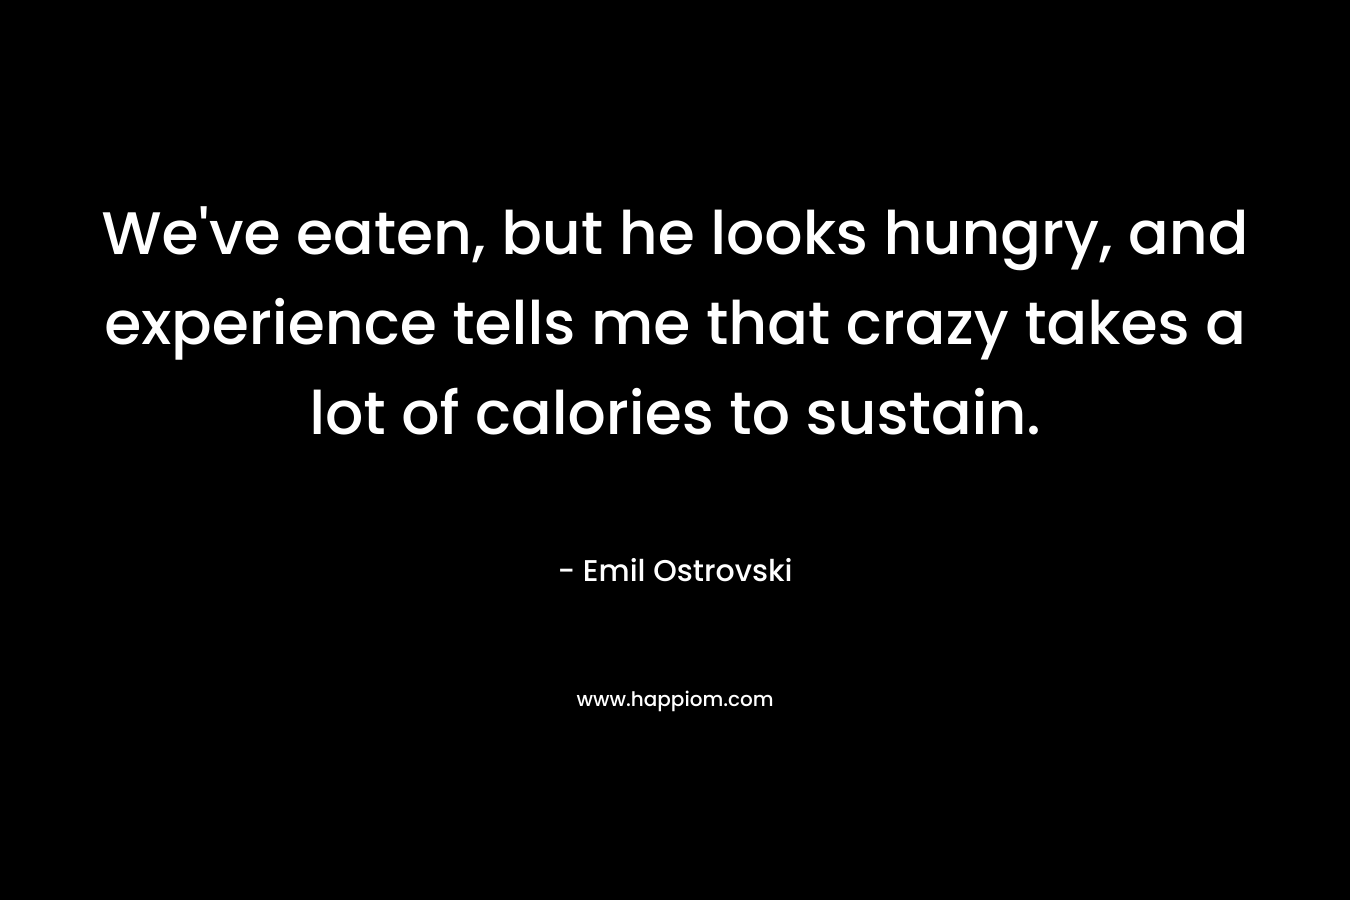 We’ve eaten, but he looks hungry, and experience tells me that crazy takes a lot of calories to sustain. – Emil Ostrovski